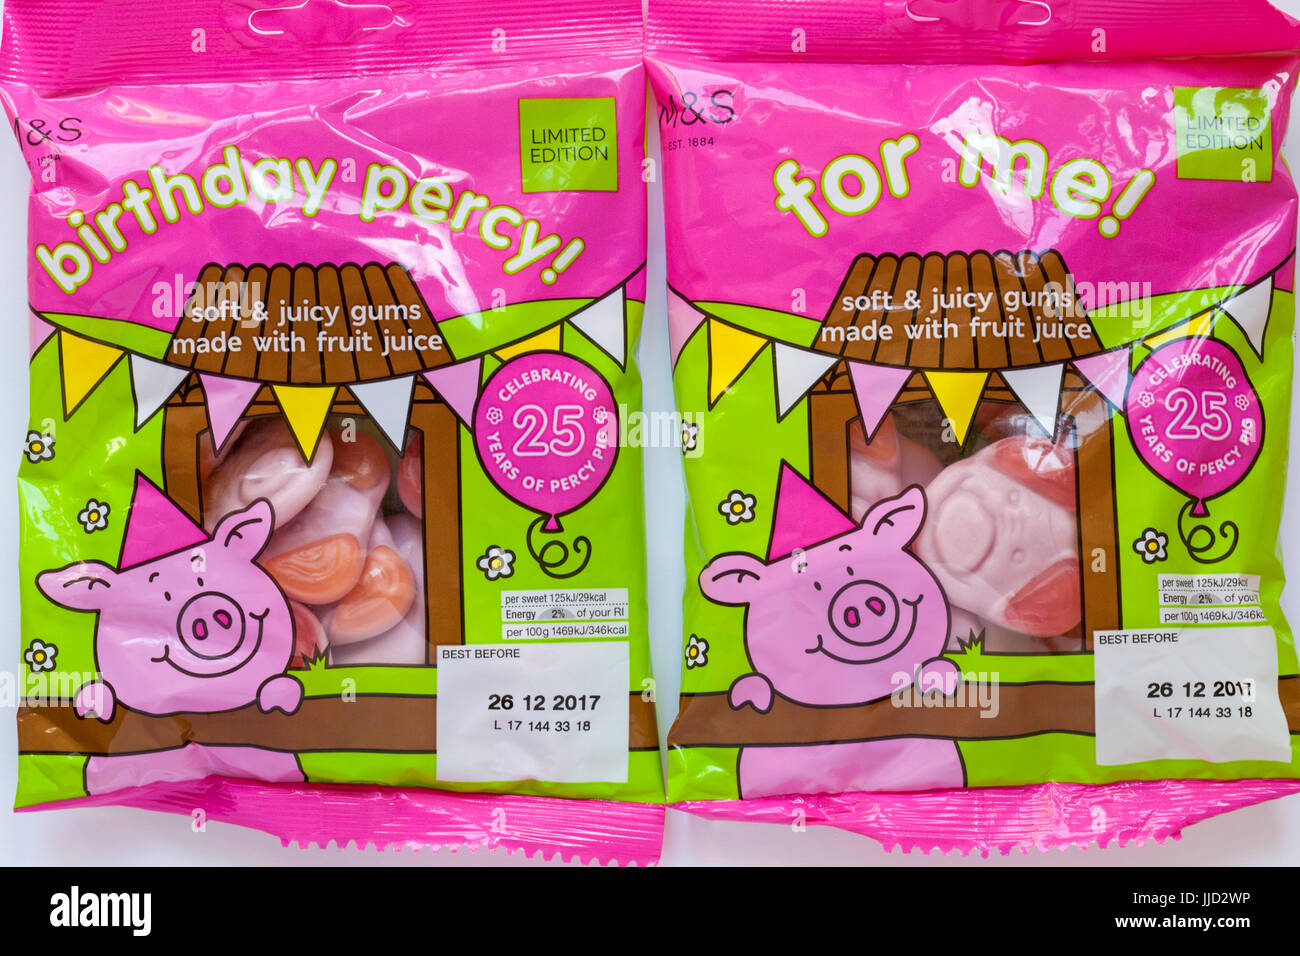 Bag of M&S for me! and bag of M&S birthday percy! percy pig sweets celebrating 25 years of Percy Pig isolated on white background Stock Photo